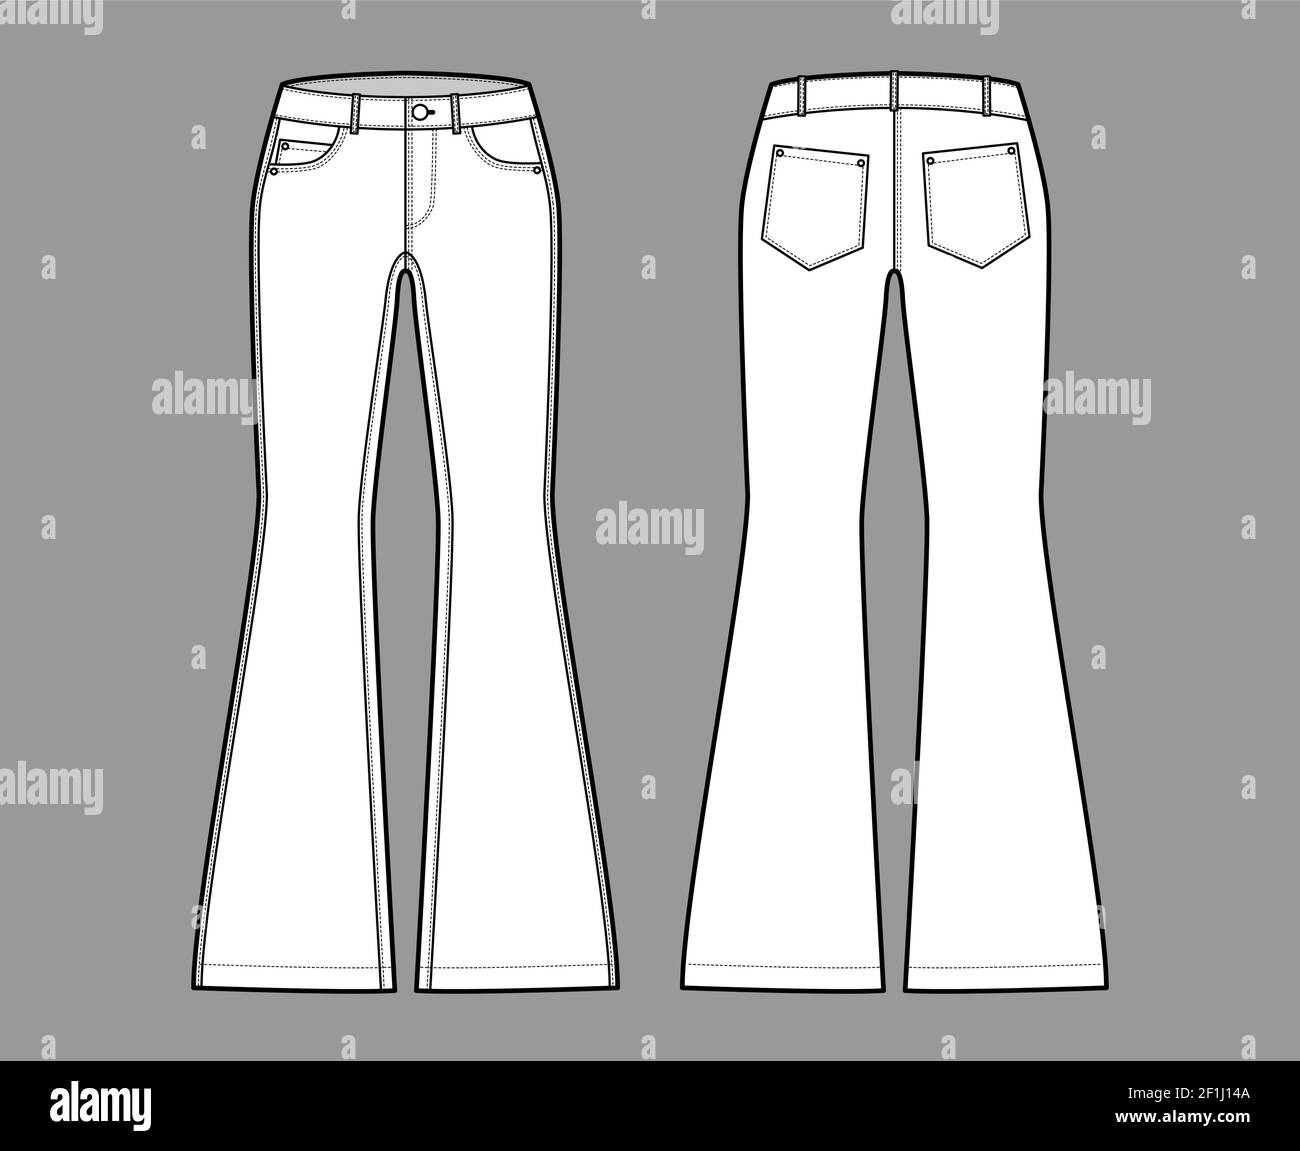 Jeans flared bottom Denim pants technical fashion illustration with full  length, low waist, rise, 5 pockets,